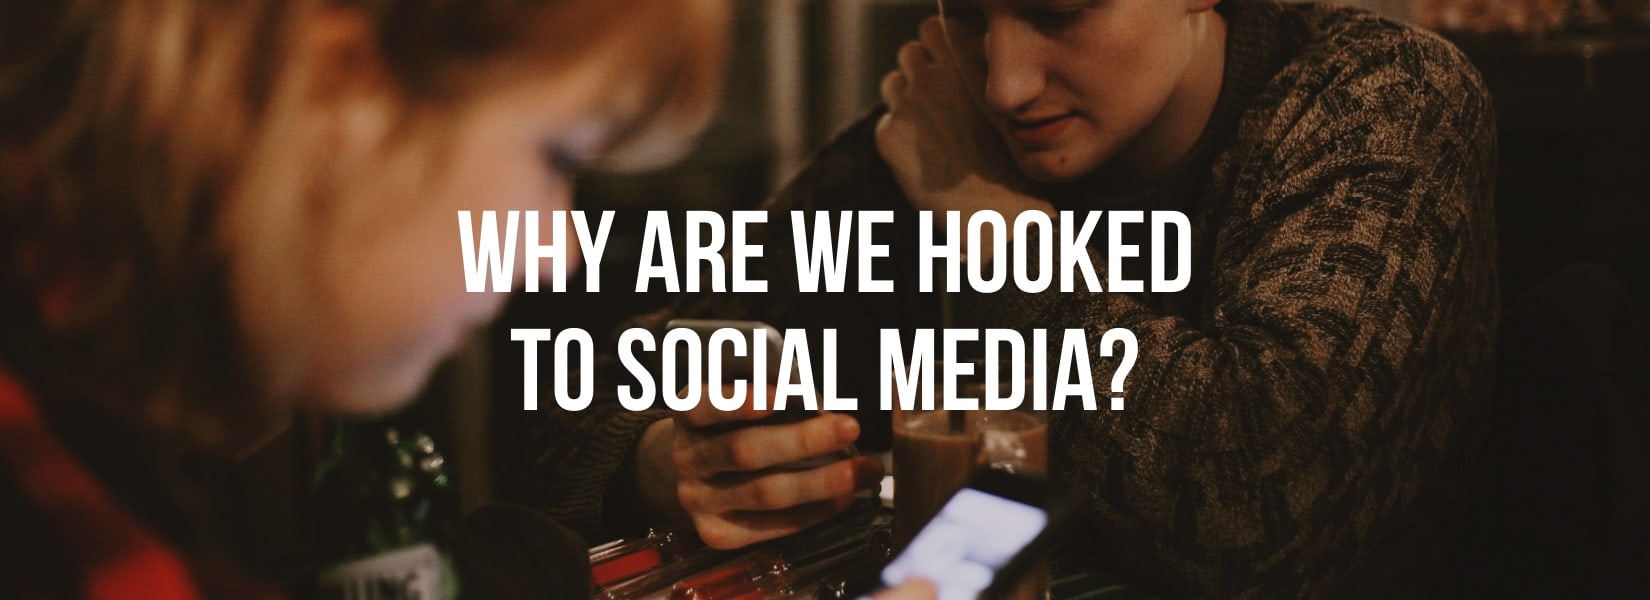 Why are we hooked to social media?